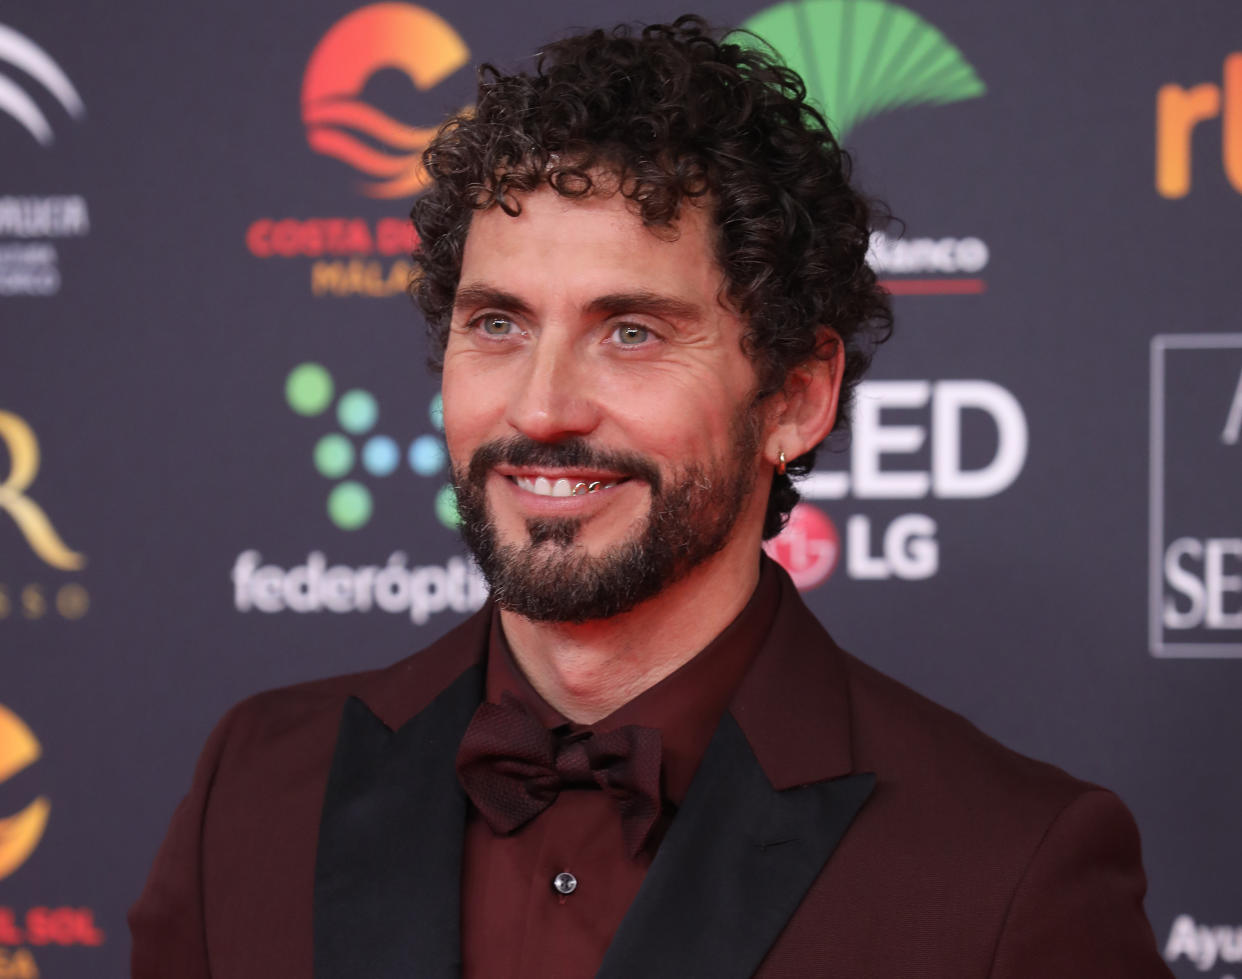 MALAGA, SPAIN - JANUARY 25: The actor Paco Leon poses on the red carpet during the 34th edition of the Goya Cinema Awards at Jose Maria Martin Carpena Sports Palace on January 25, 2020 in Malaga, Spain.  (Photo by María José López/Europa Press via Getty Images) (Photo by Europa Press News/Europa Press via Getty Images)